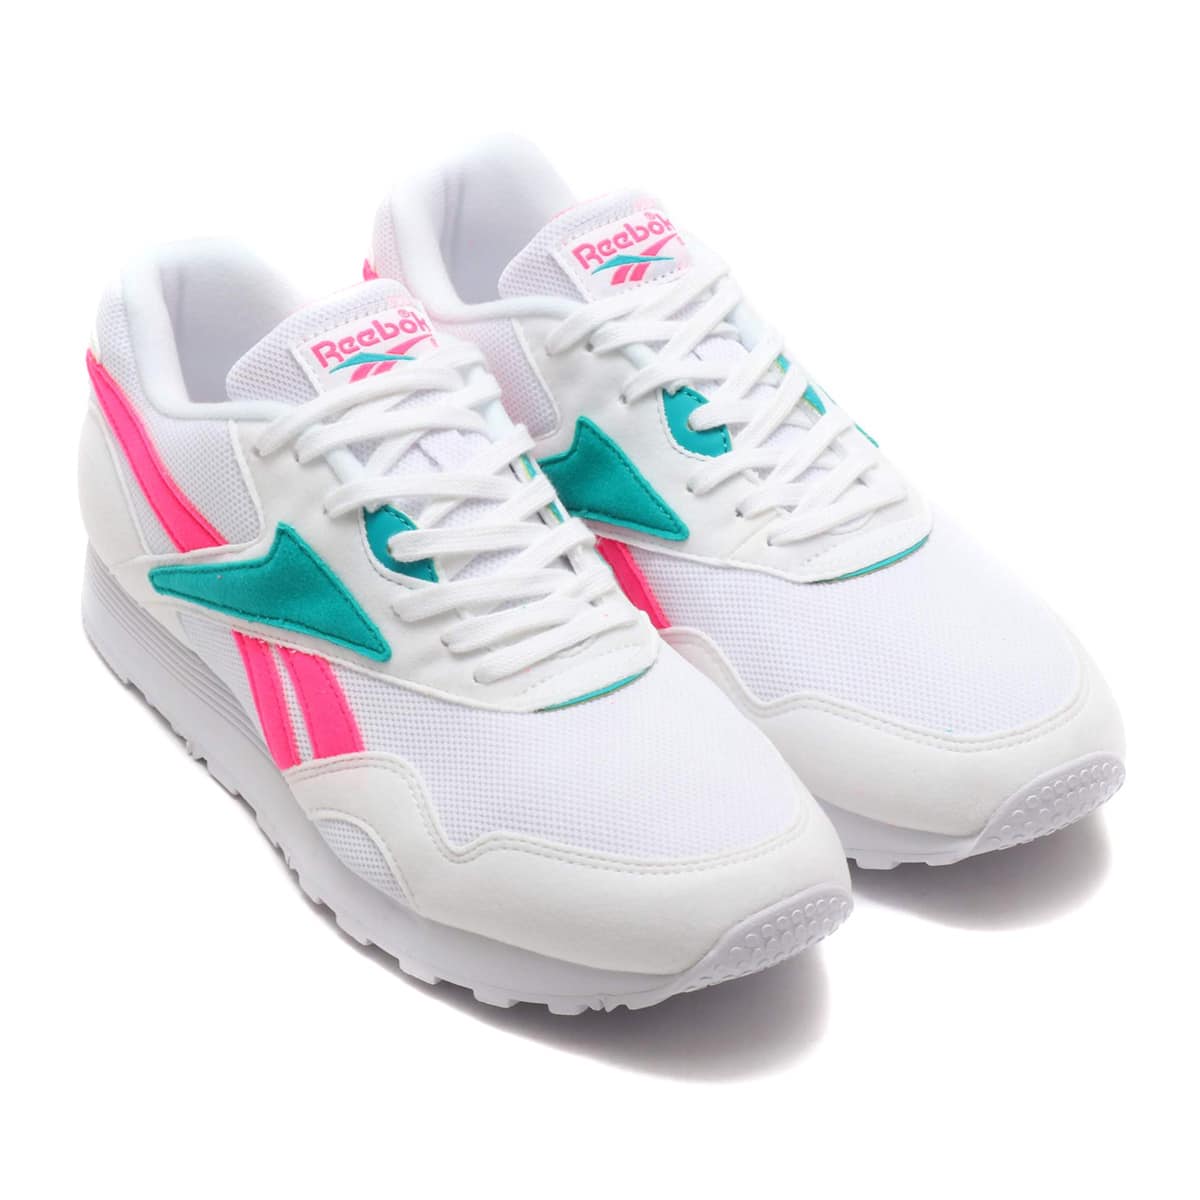 RAPIDE 90s WHITE/TOTARY PINK 18FW-I